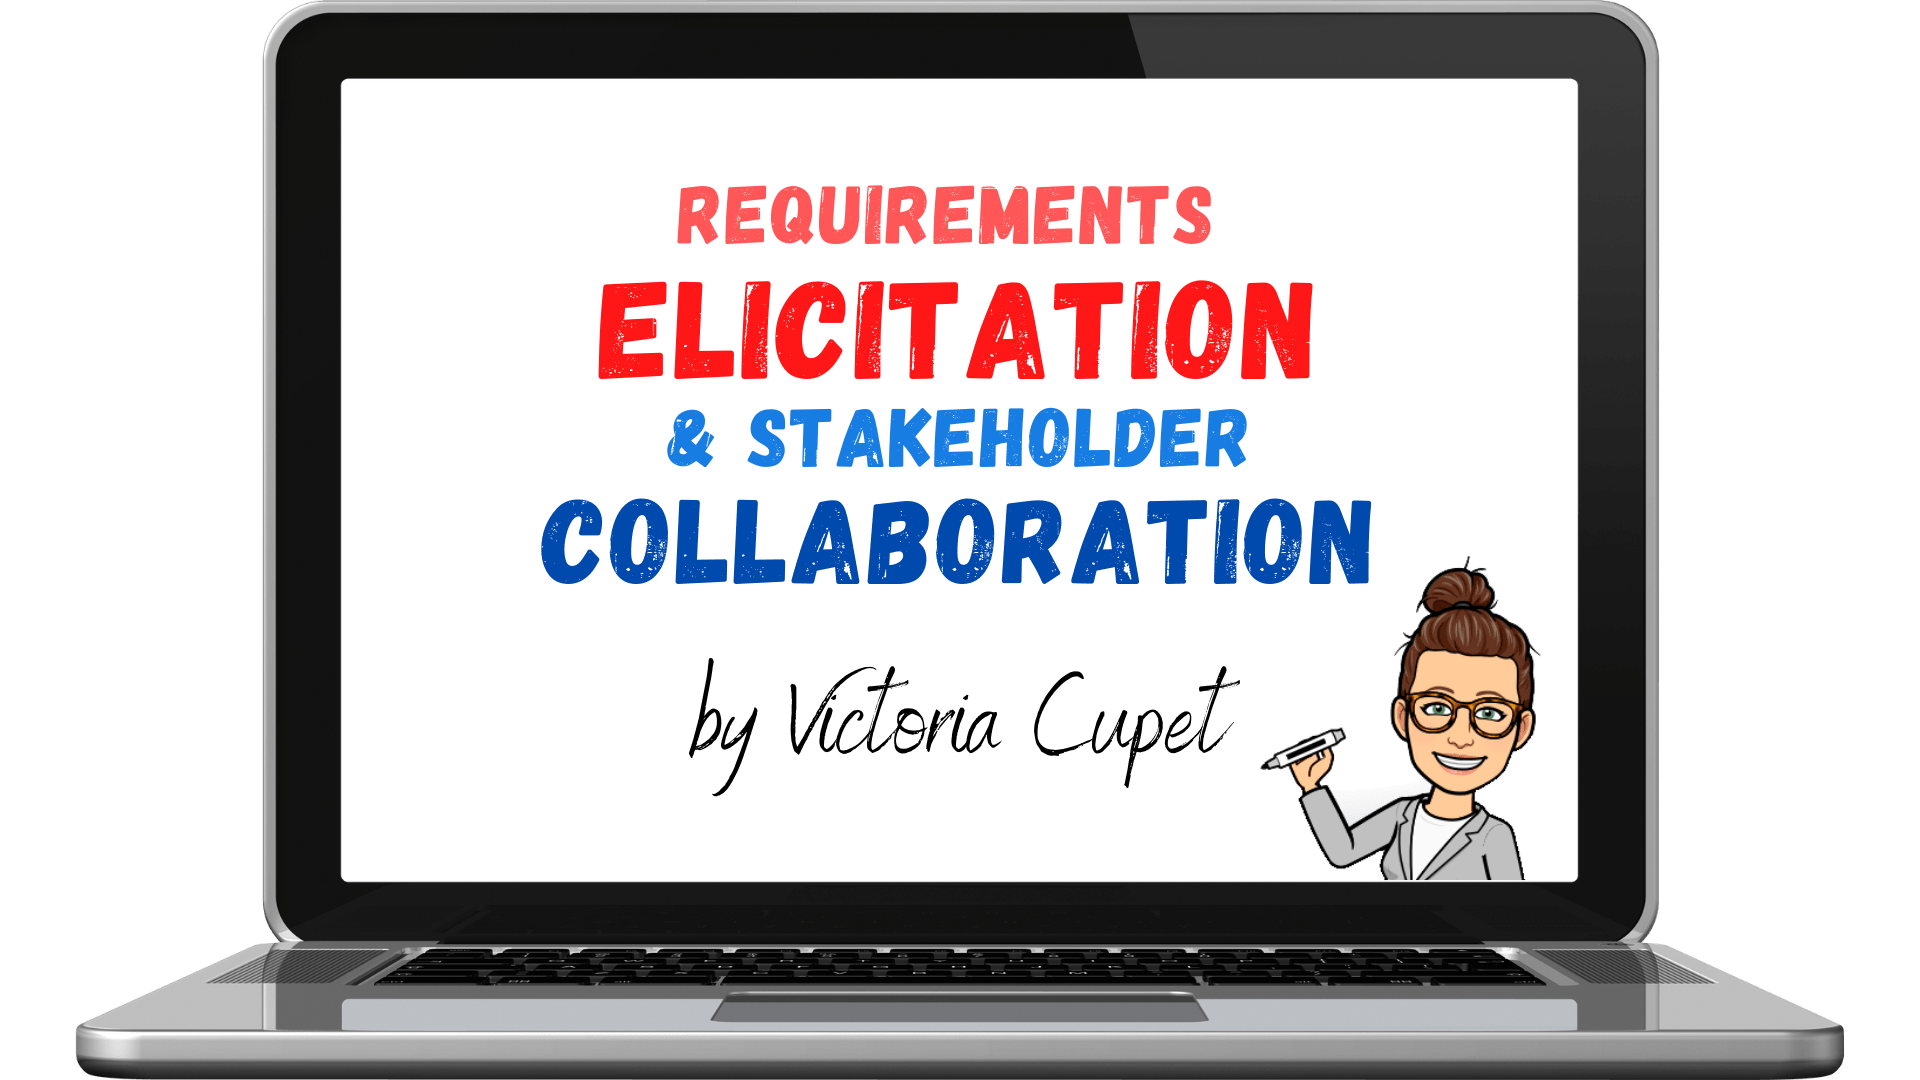 Elicitation and collaboration